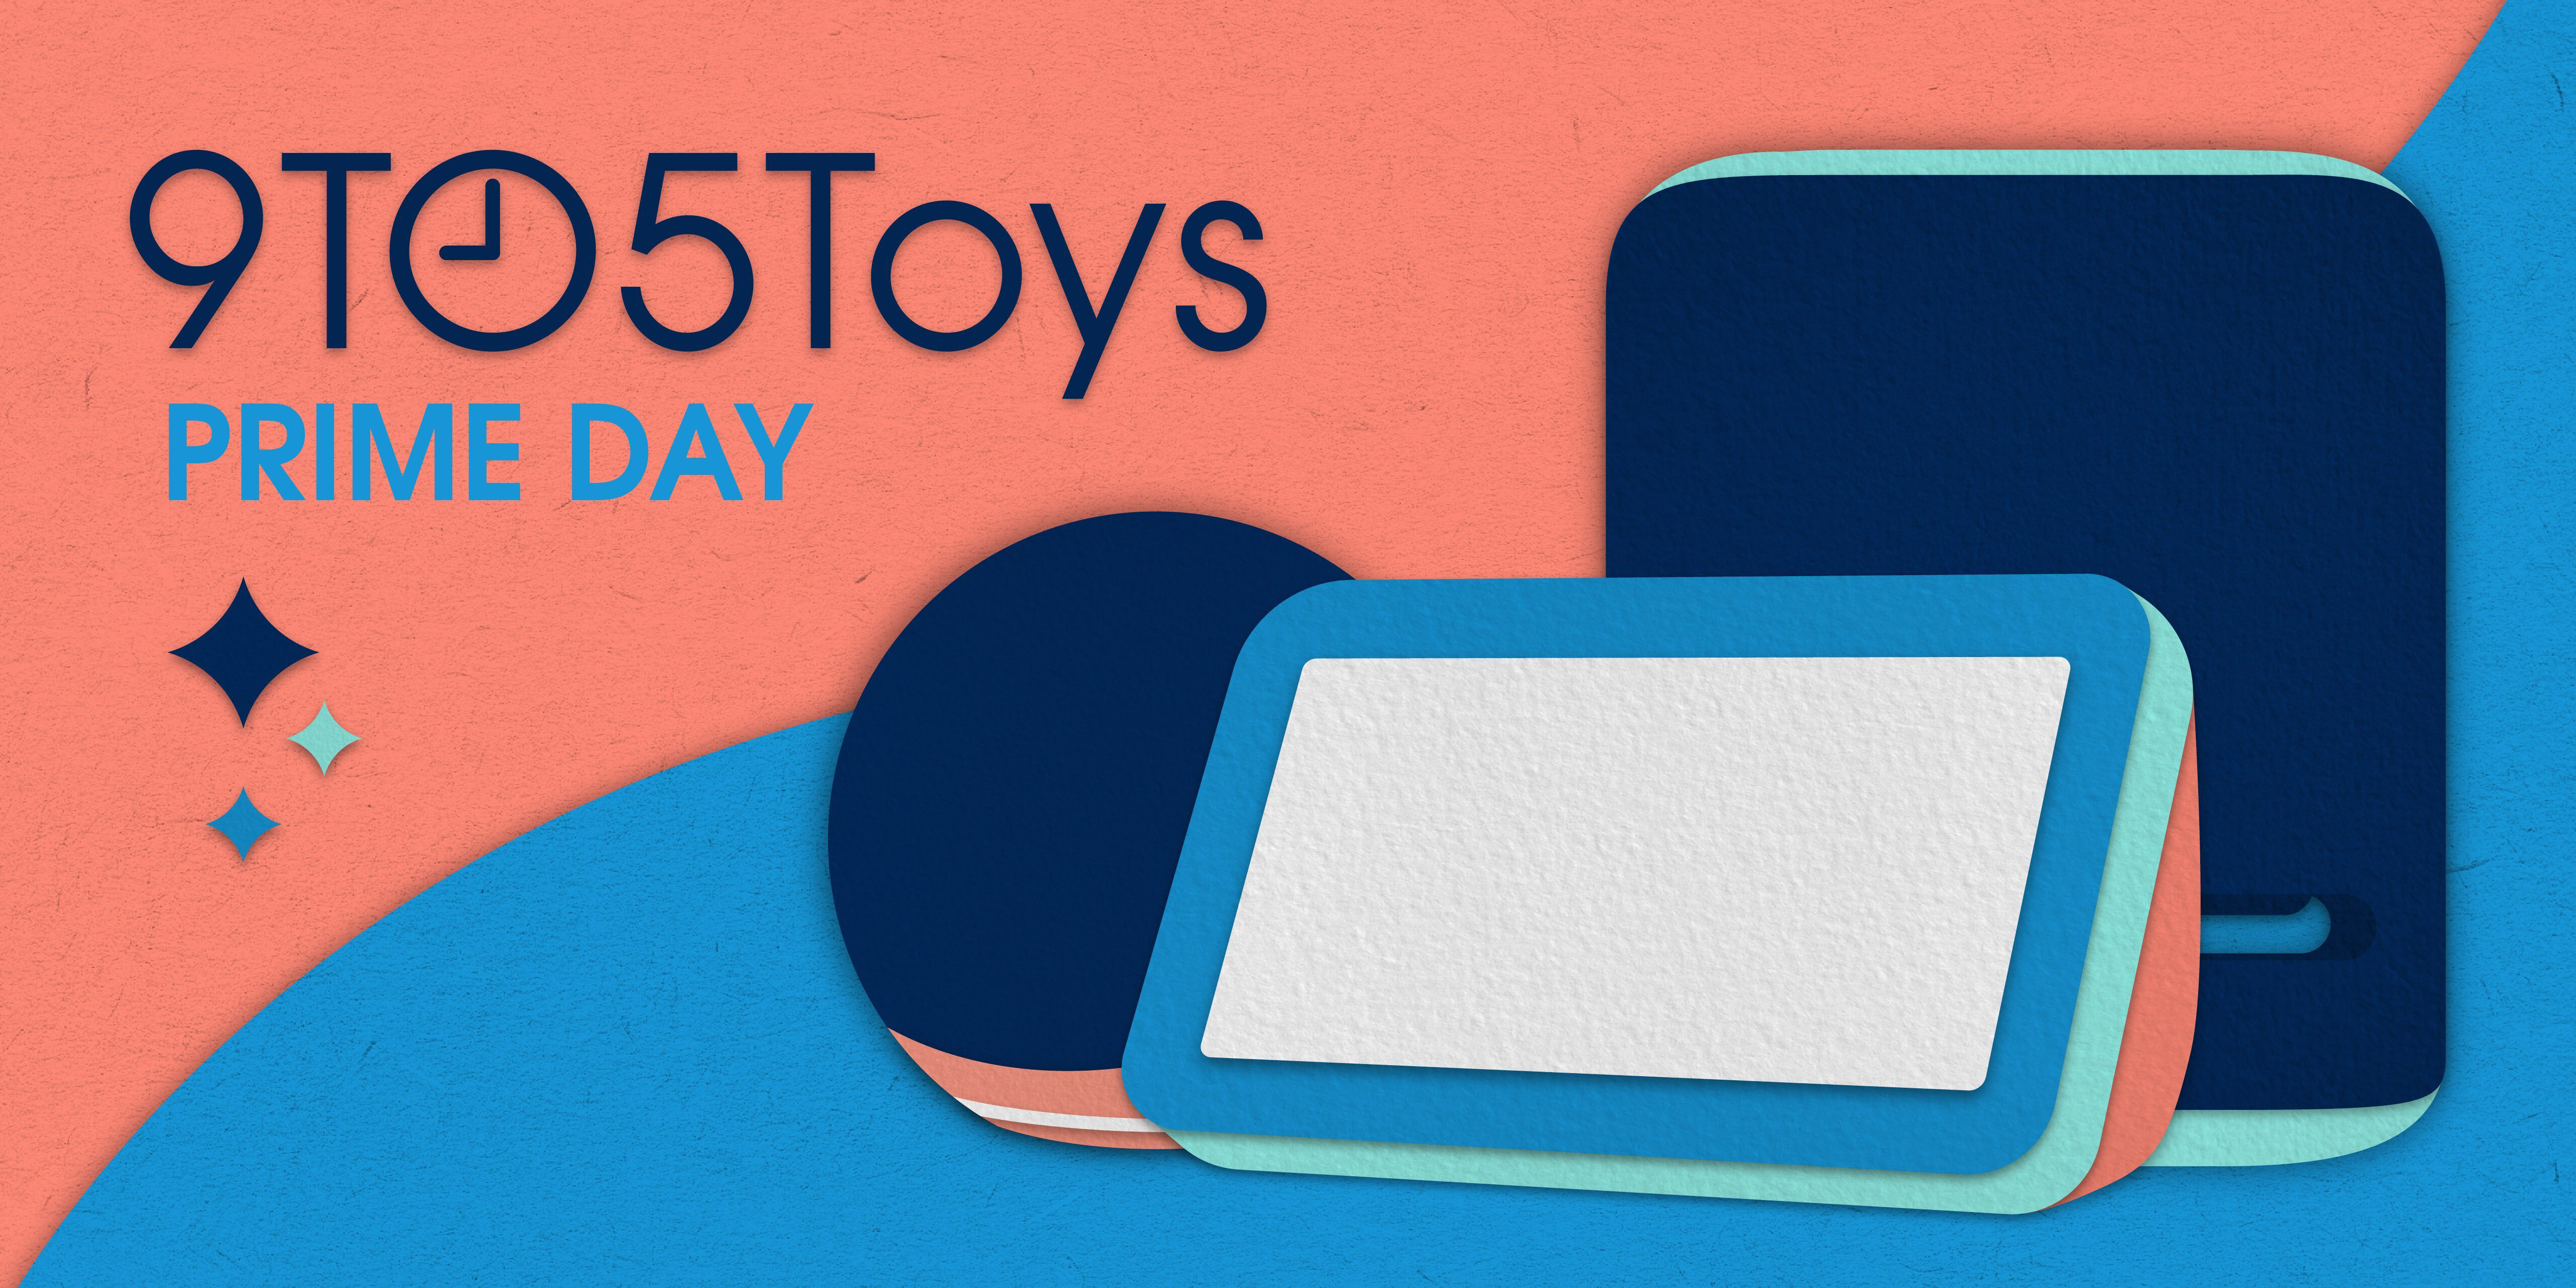 https://9to5toys.com/wp-content/uploads/sites/5/2022/07/9to5toys_prime_day_2022.jpg